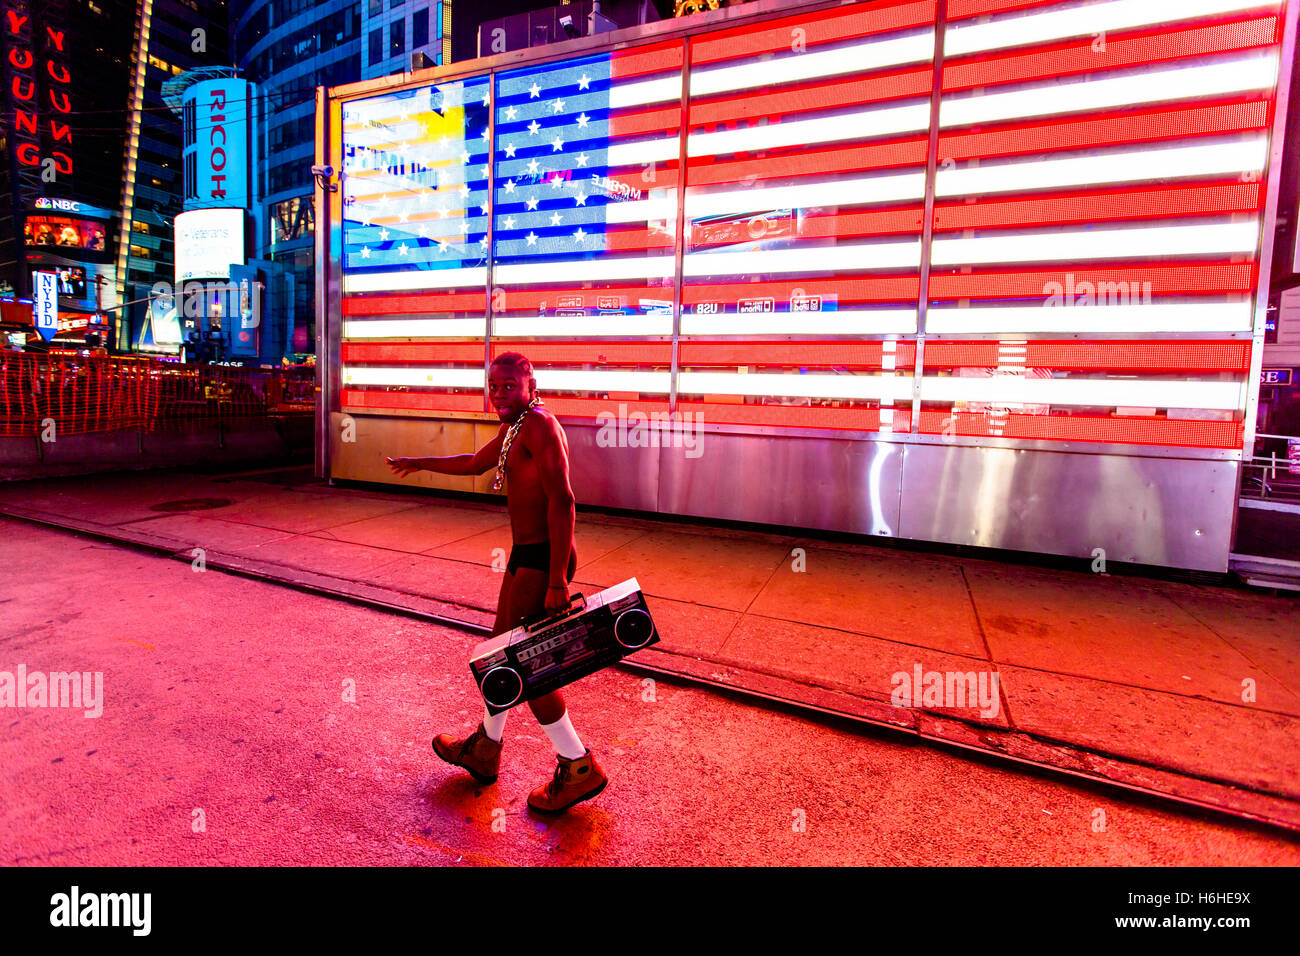 NEW YORK - NOV 11: Street performer in his underwear, holding a retro cassette player in front of the LED American flag in Times Stock Photo